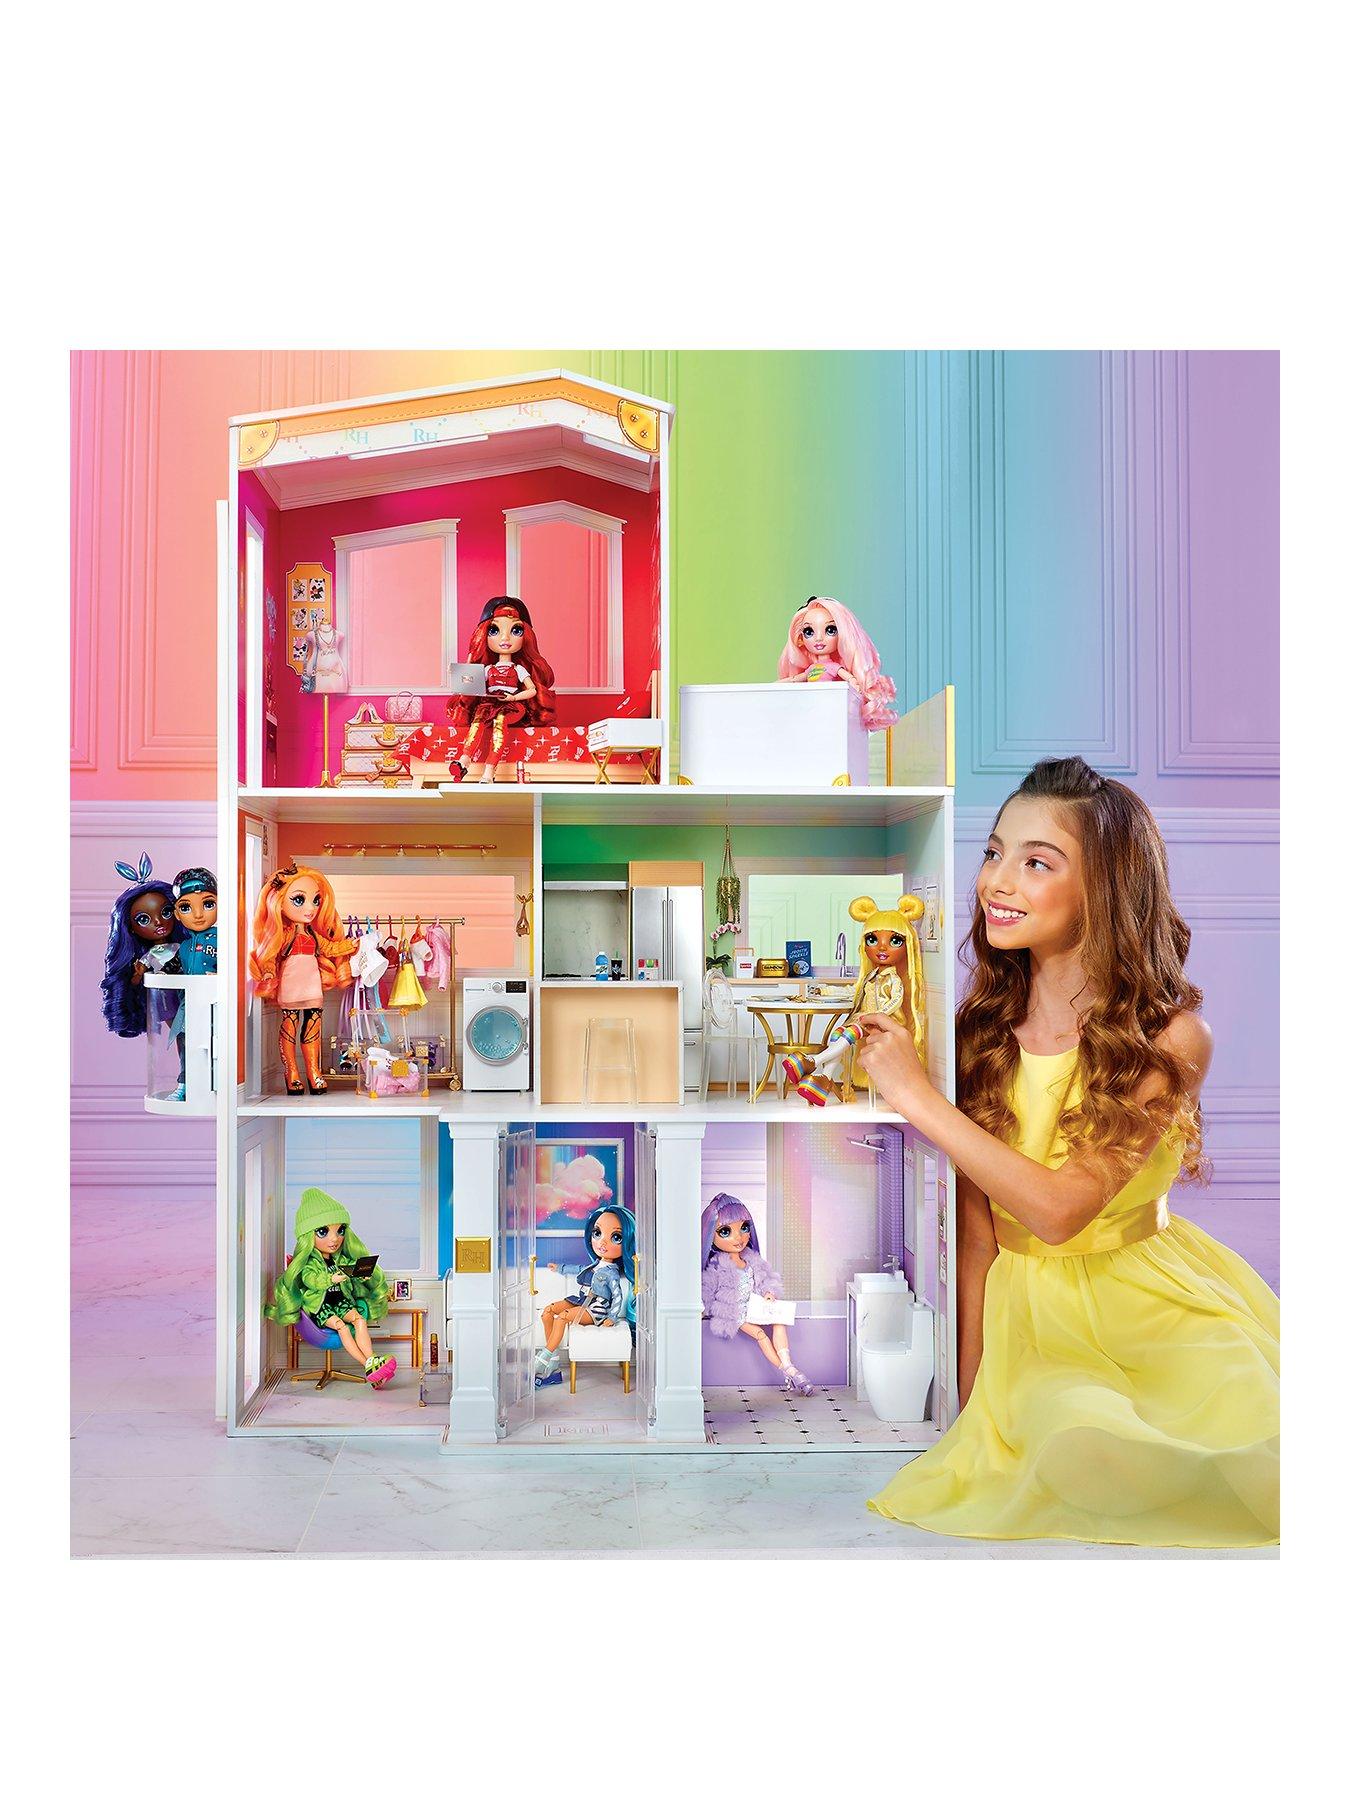 Dream Doll House - Decorating Game for Free Play on PC